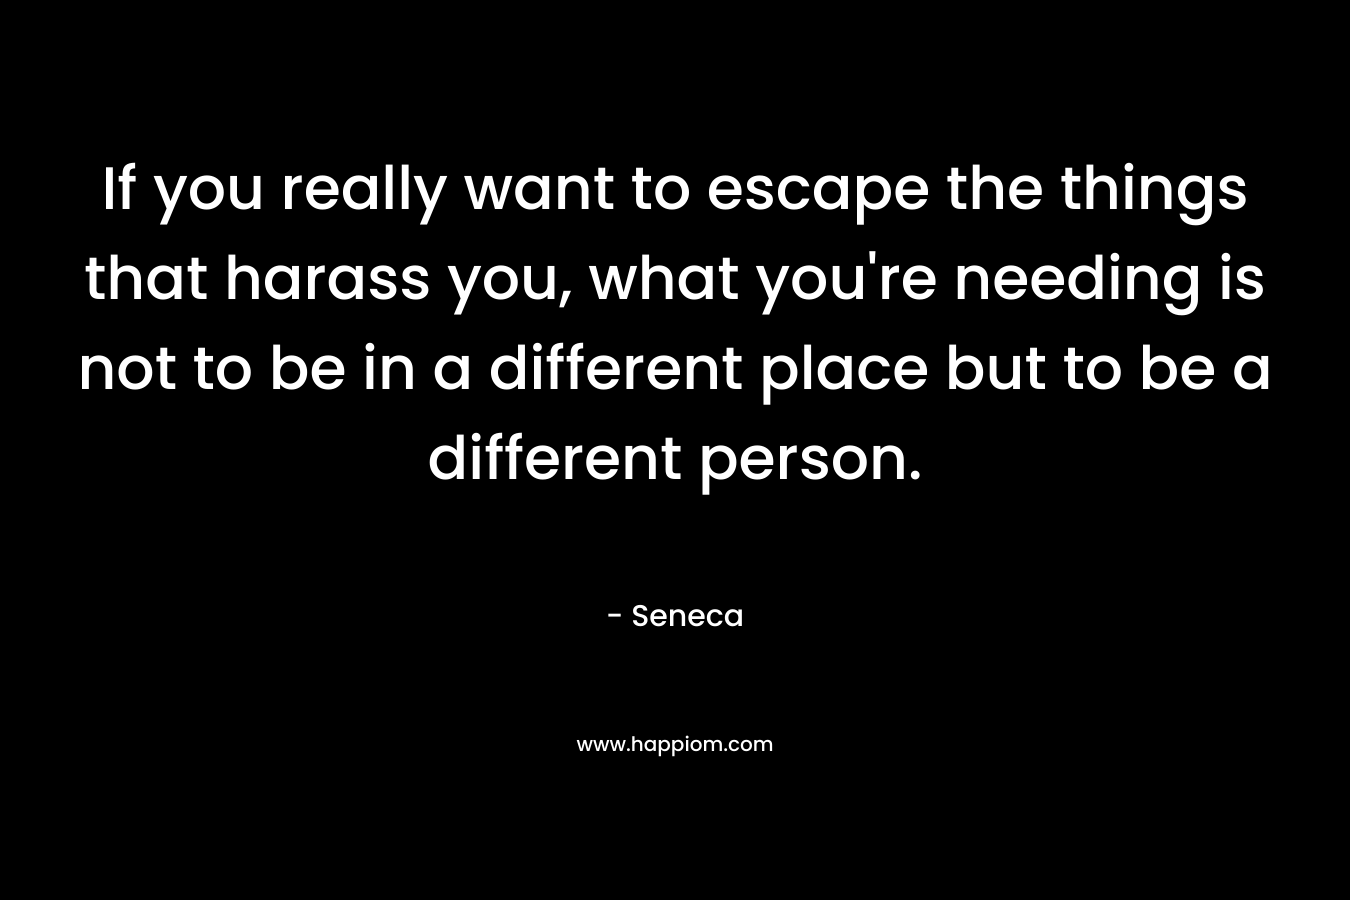 If you really want to escape the things that harass you, what you're needing is not to be in a different place but to be a different person.